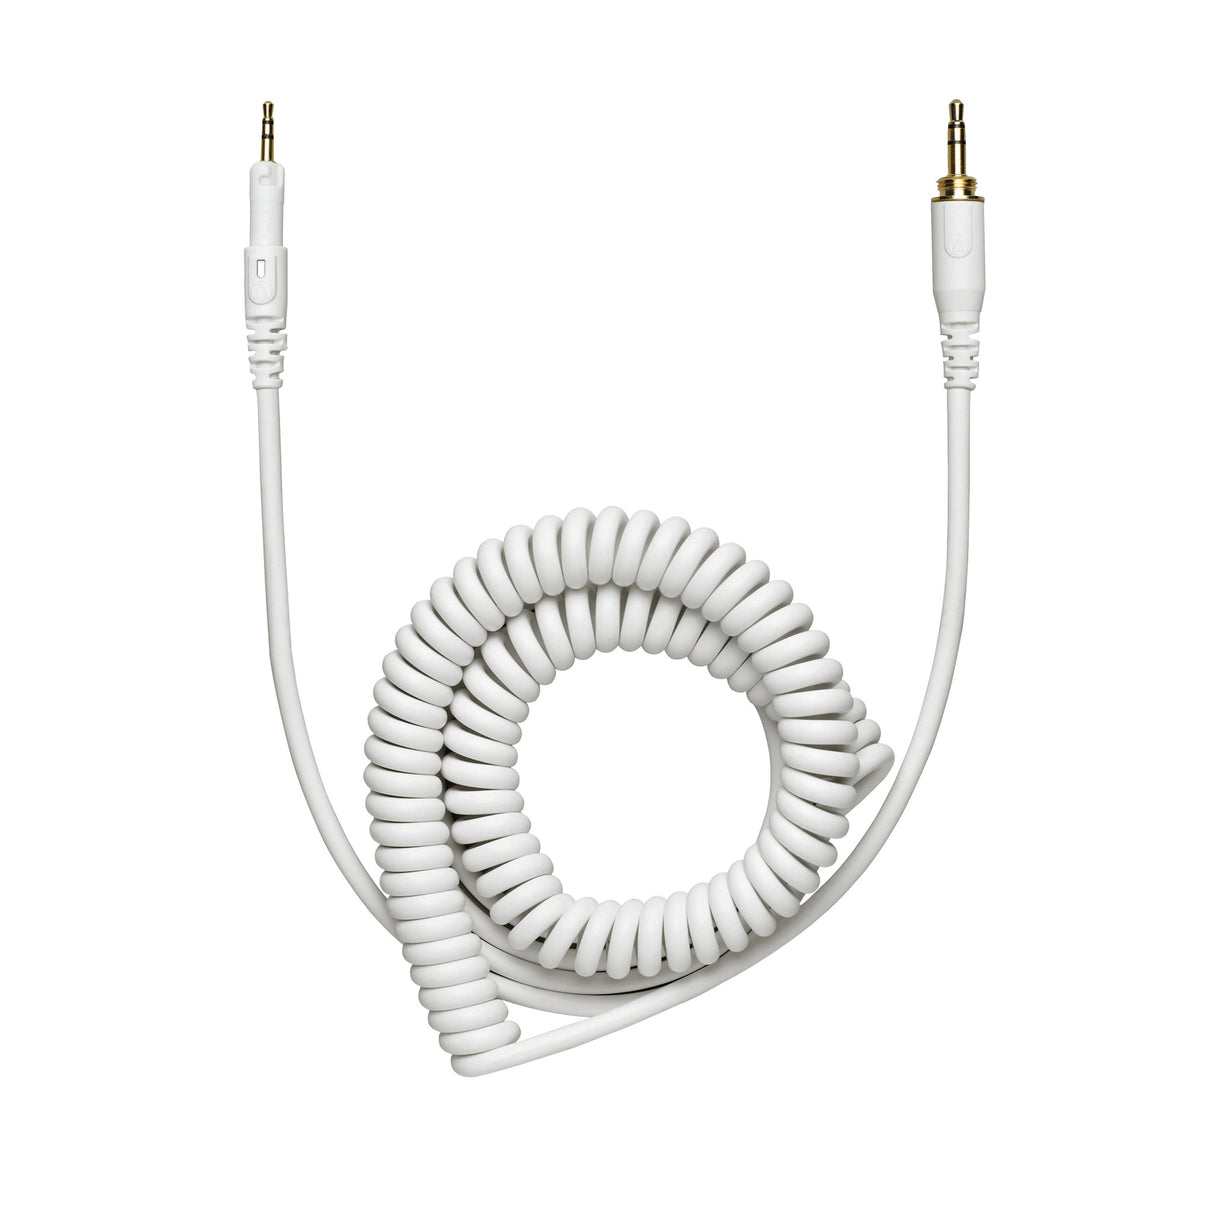 Audio-Technica ATH-HPCCWH Replacement Cable for M-Series Headphones, White